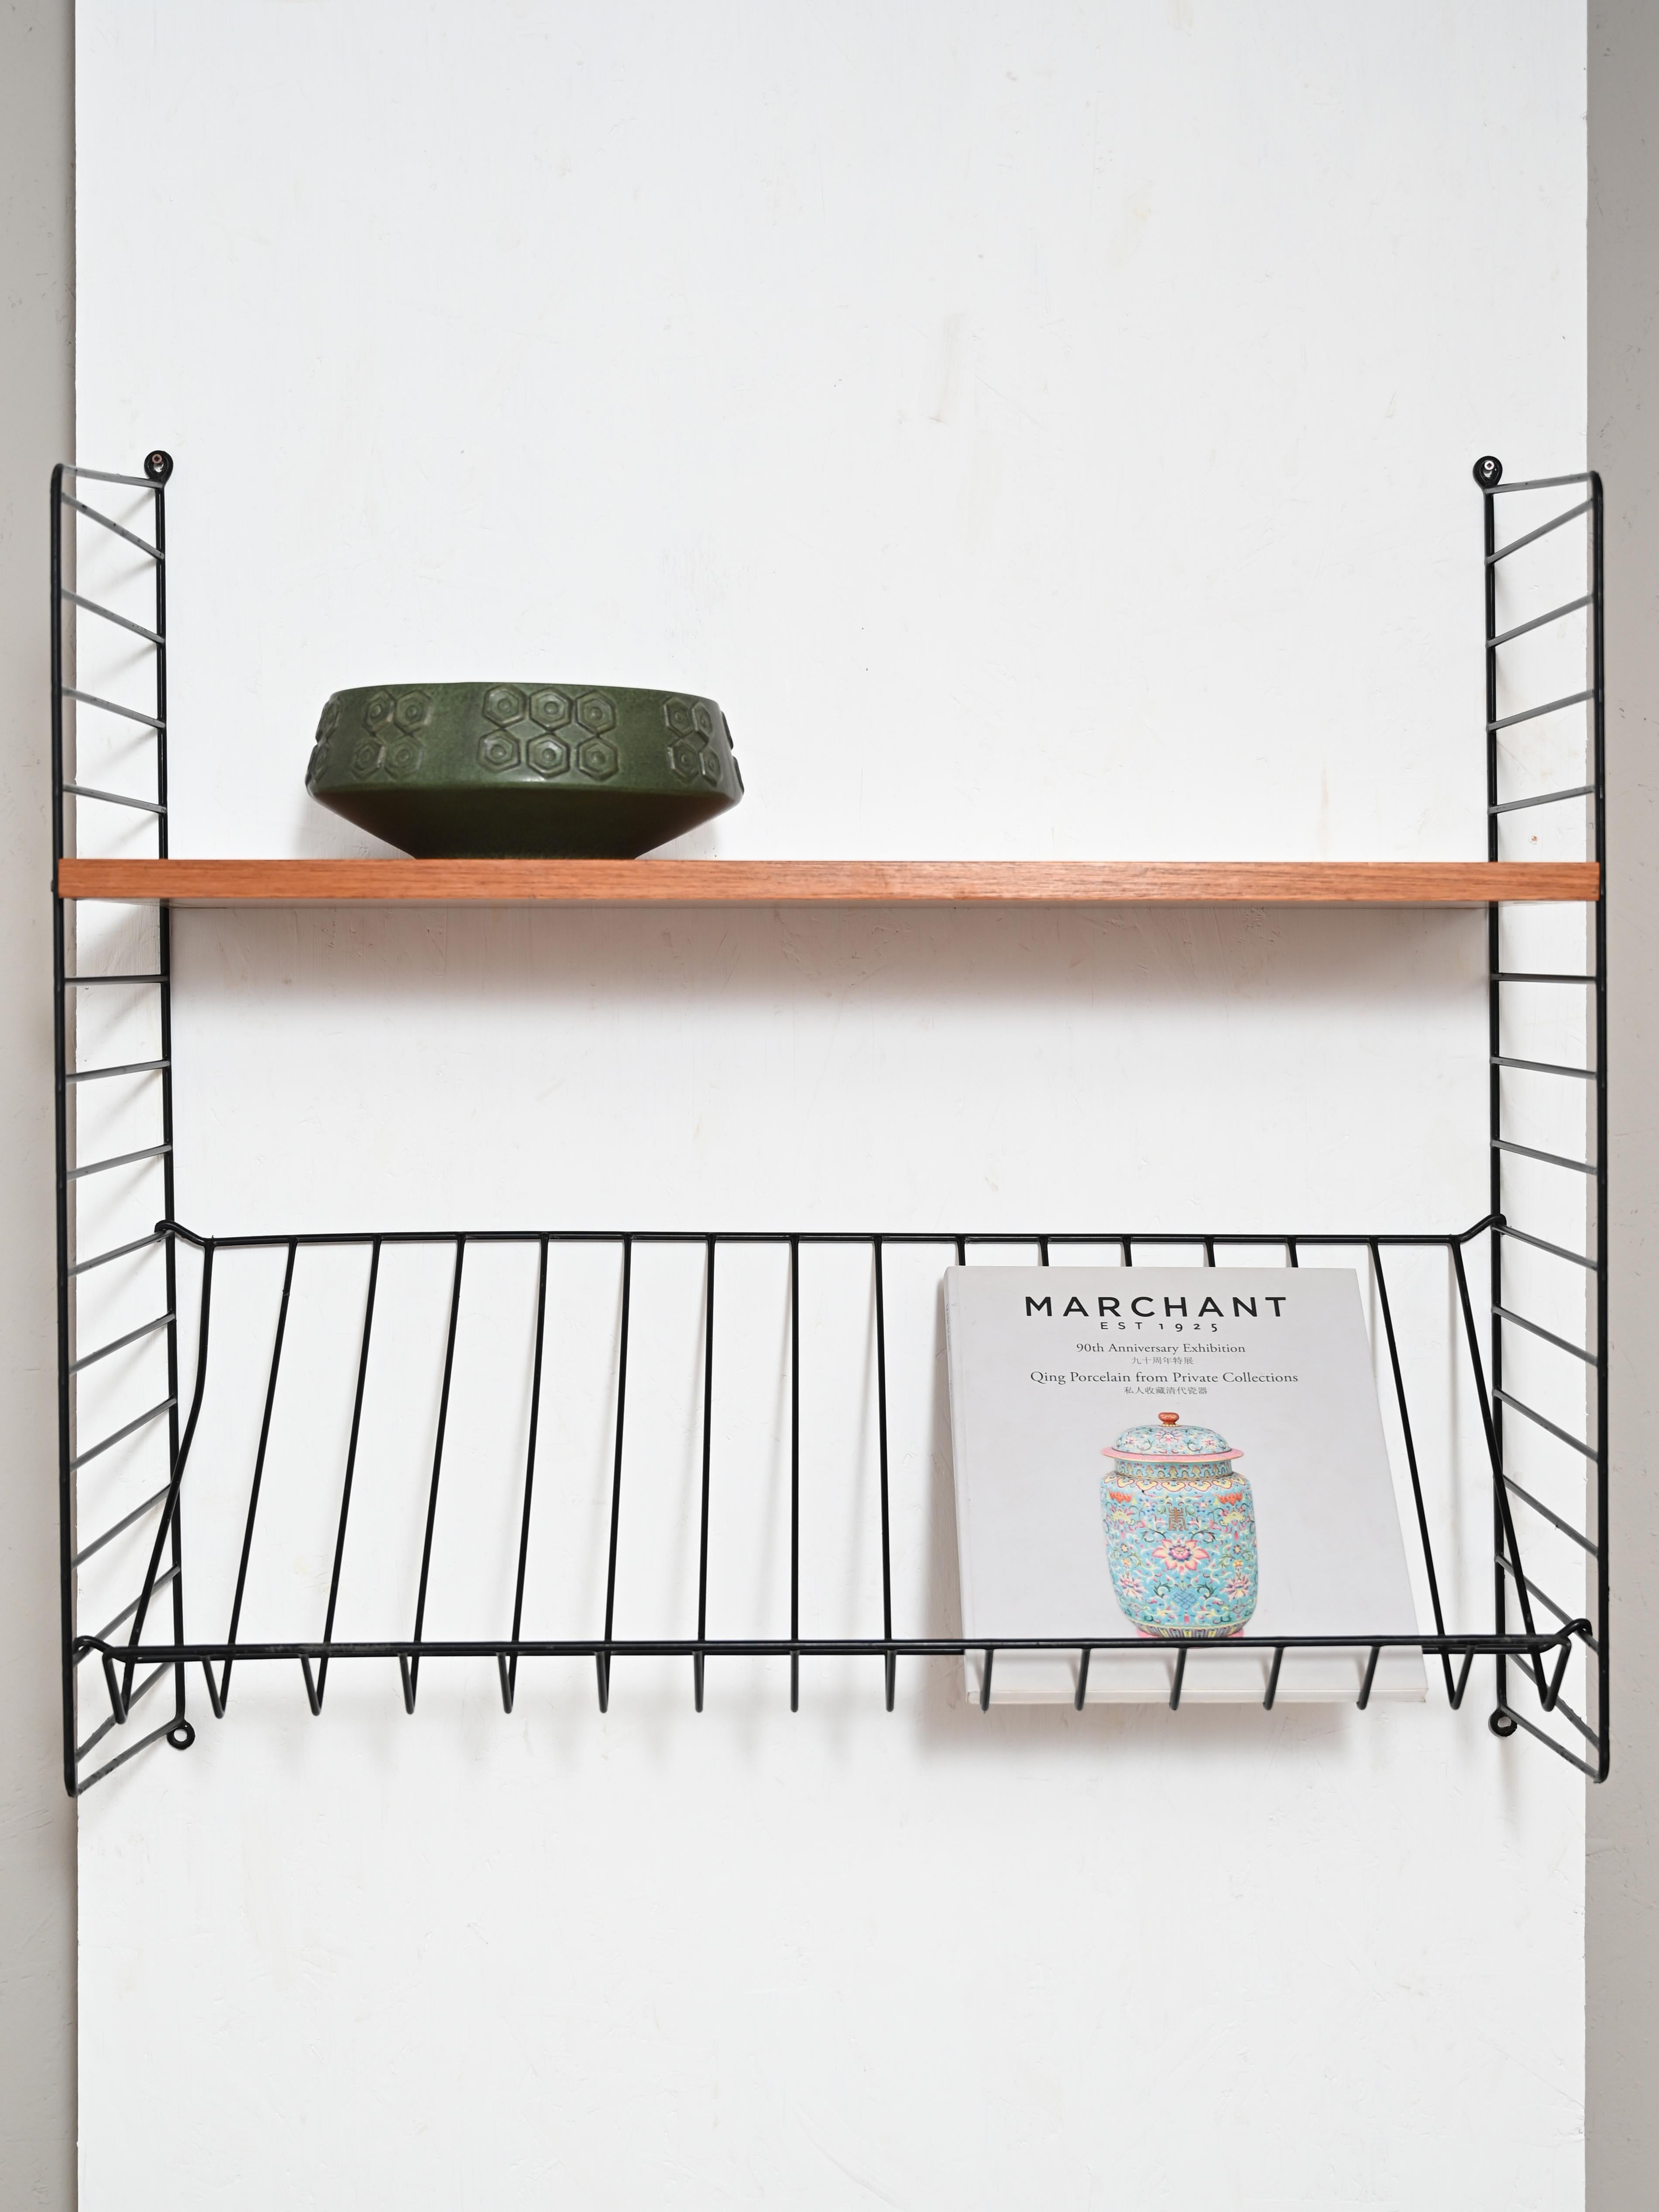 Wall-mounted teak and metal bookcase
Peculiar wall bookcase equipped with a height-adjustable wooden shelf and a frame
metal as well as the magazine shelf.
Can be juxtaposed with other similar shelving units to make up a wall unit.
Good